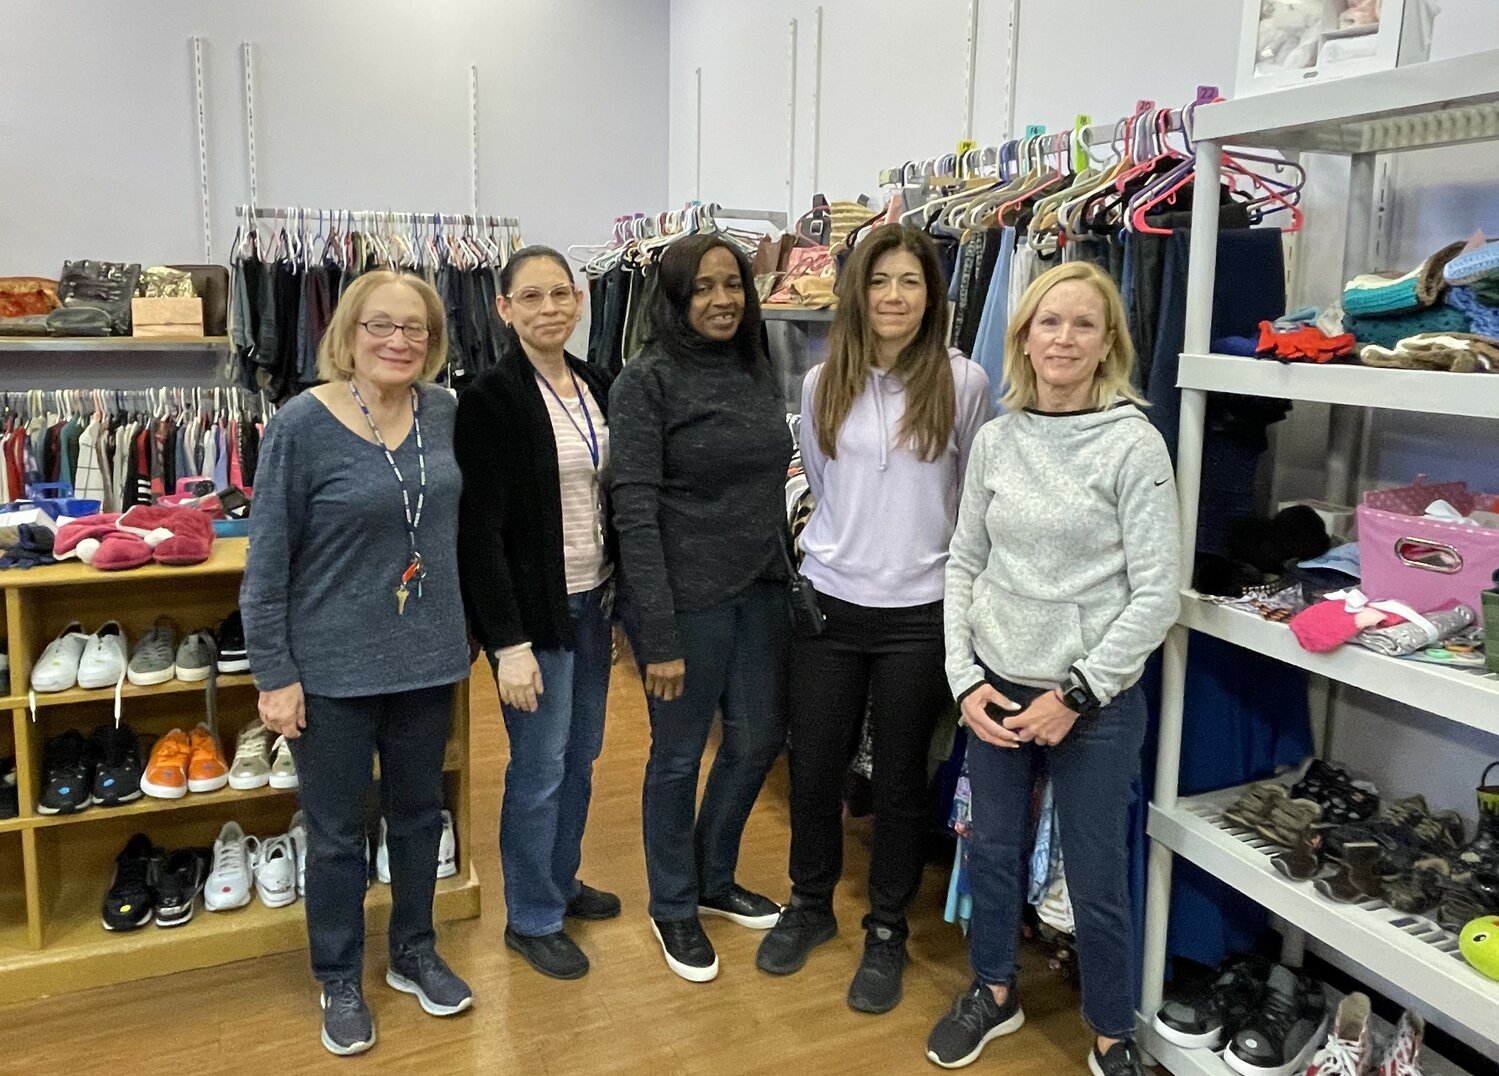 Thanks to faithful volunteers, an expanded Mary Brennan INN clothing boutique reopened on March 1 after three years of closure due to Covid.